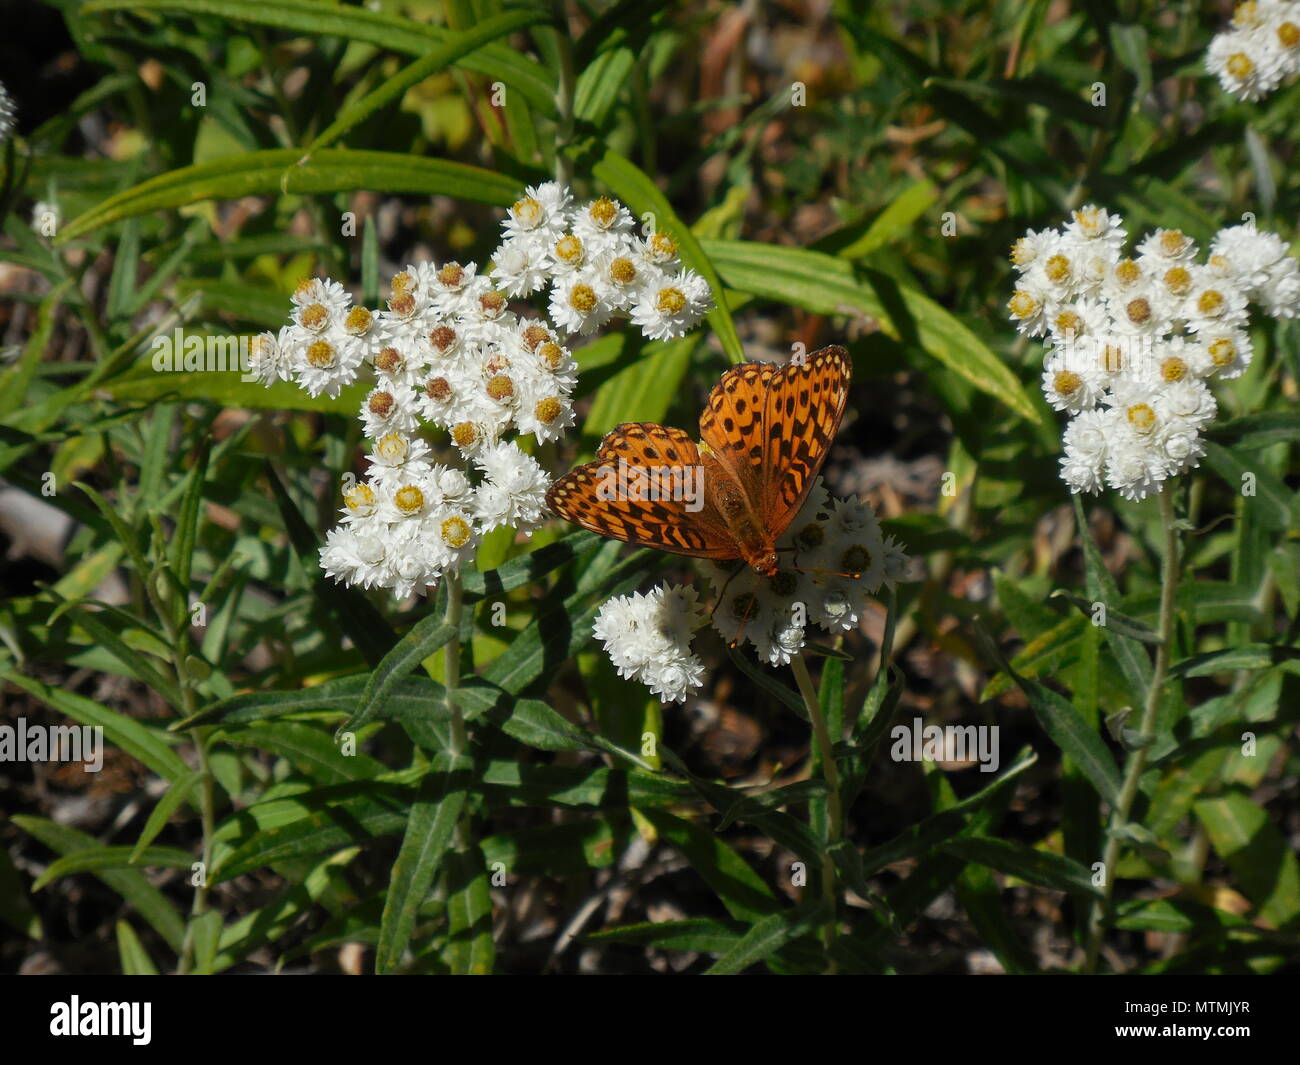 Variegated Fritillary Orange Butterfly Resting on Small White Flowers Stock Photo